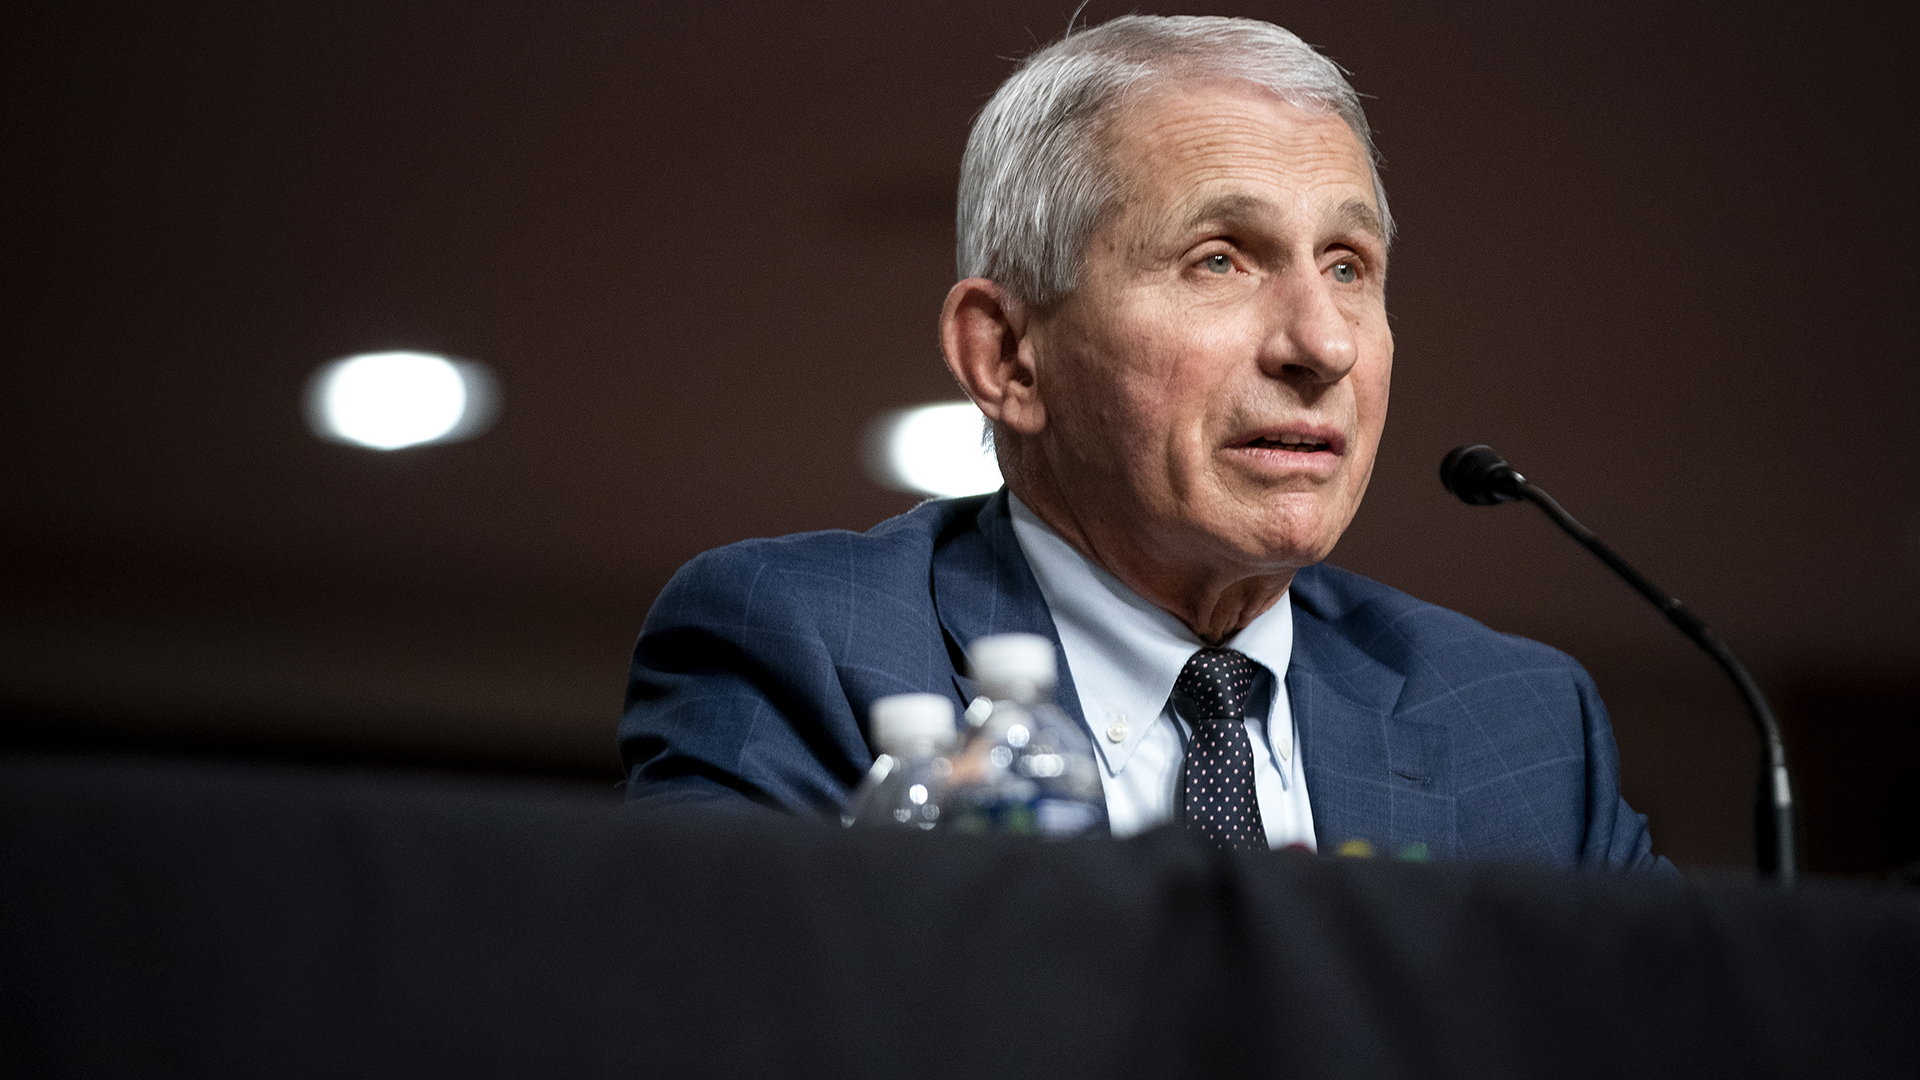 Dr. Anthony Fauci To Give Commencement Address At Roger Williams University In May